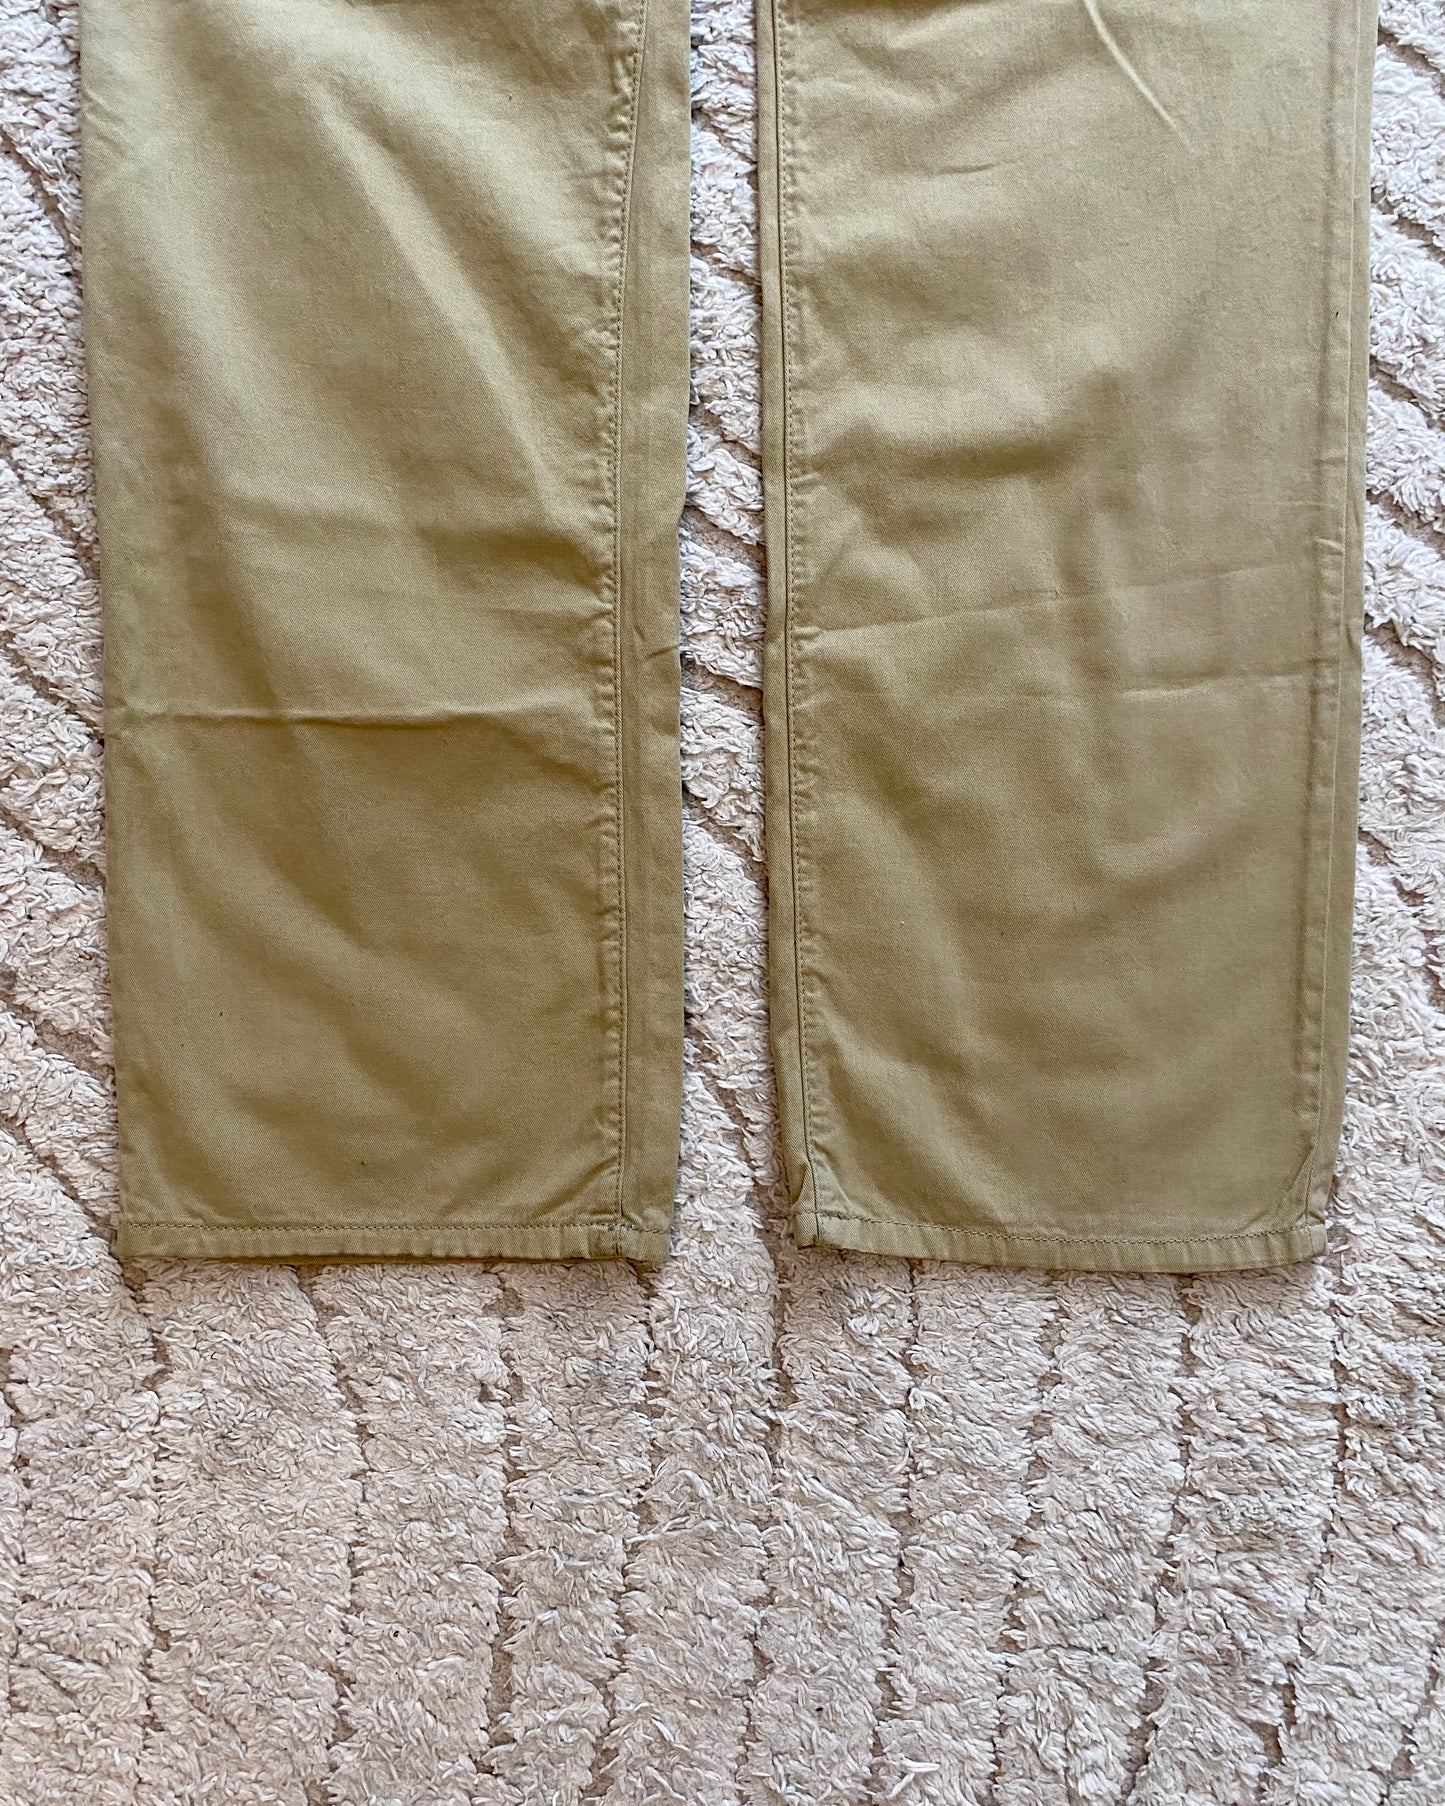 AW08 Dolce & Gabbana Beige Sophisticated Utility Pants (L)